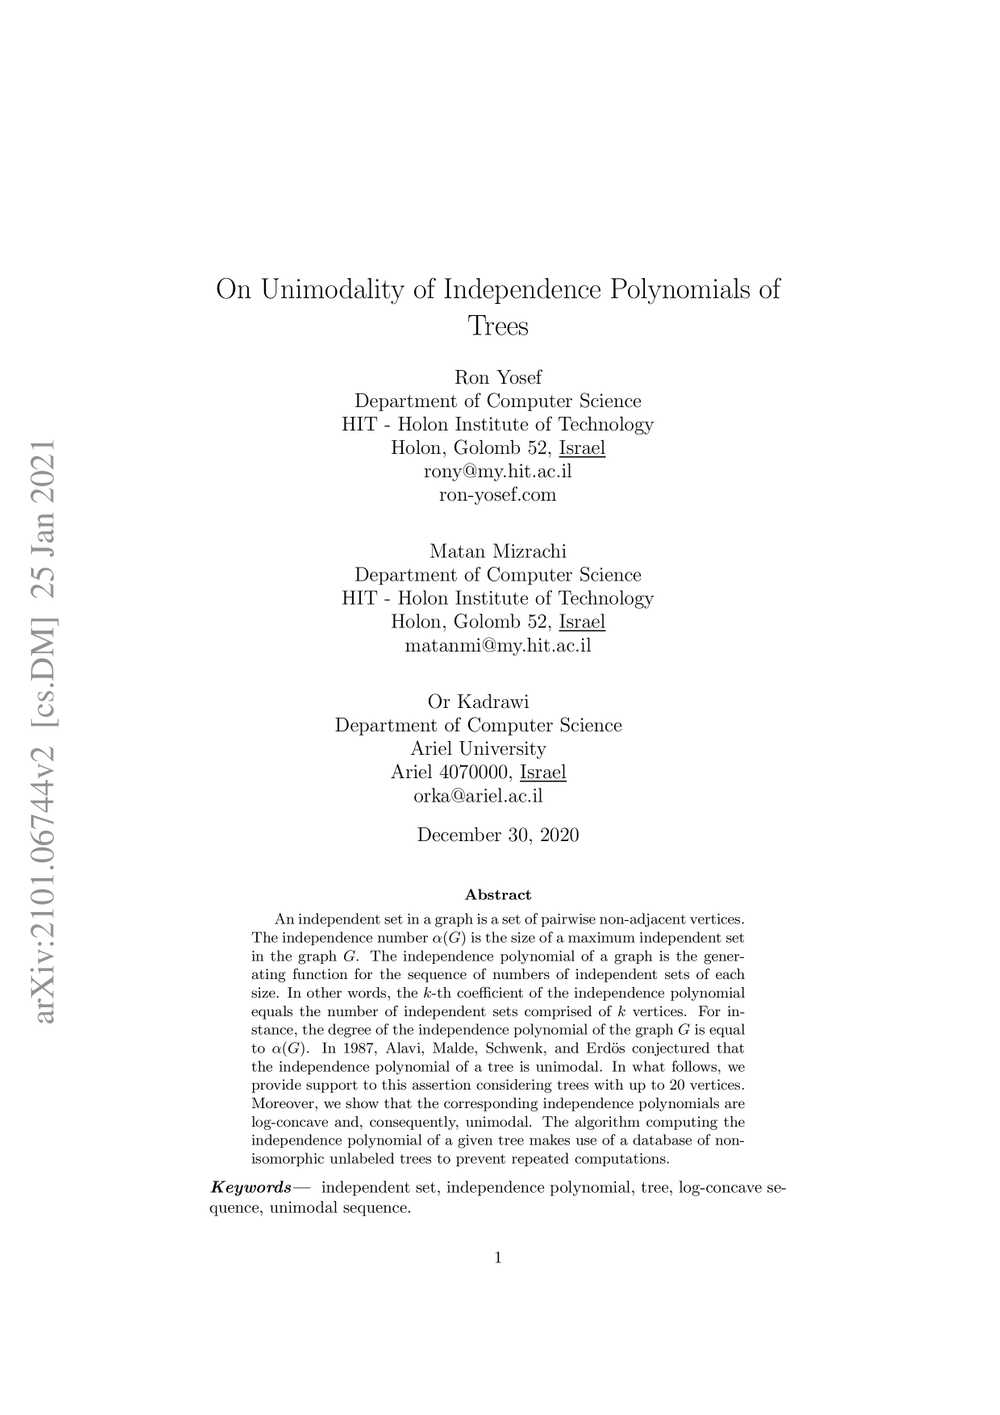 On Unimodality of Independence Polynomials of Trees